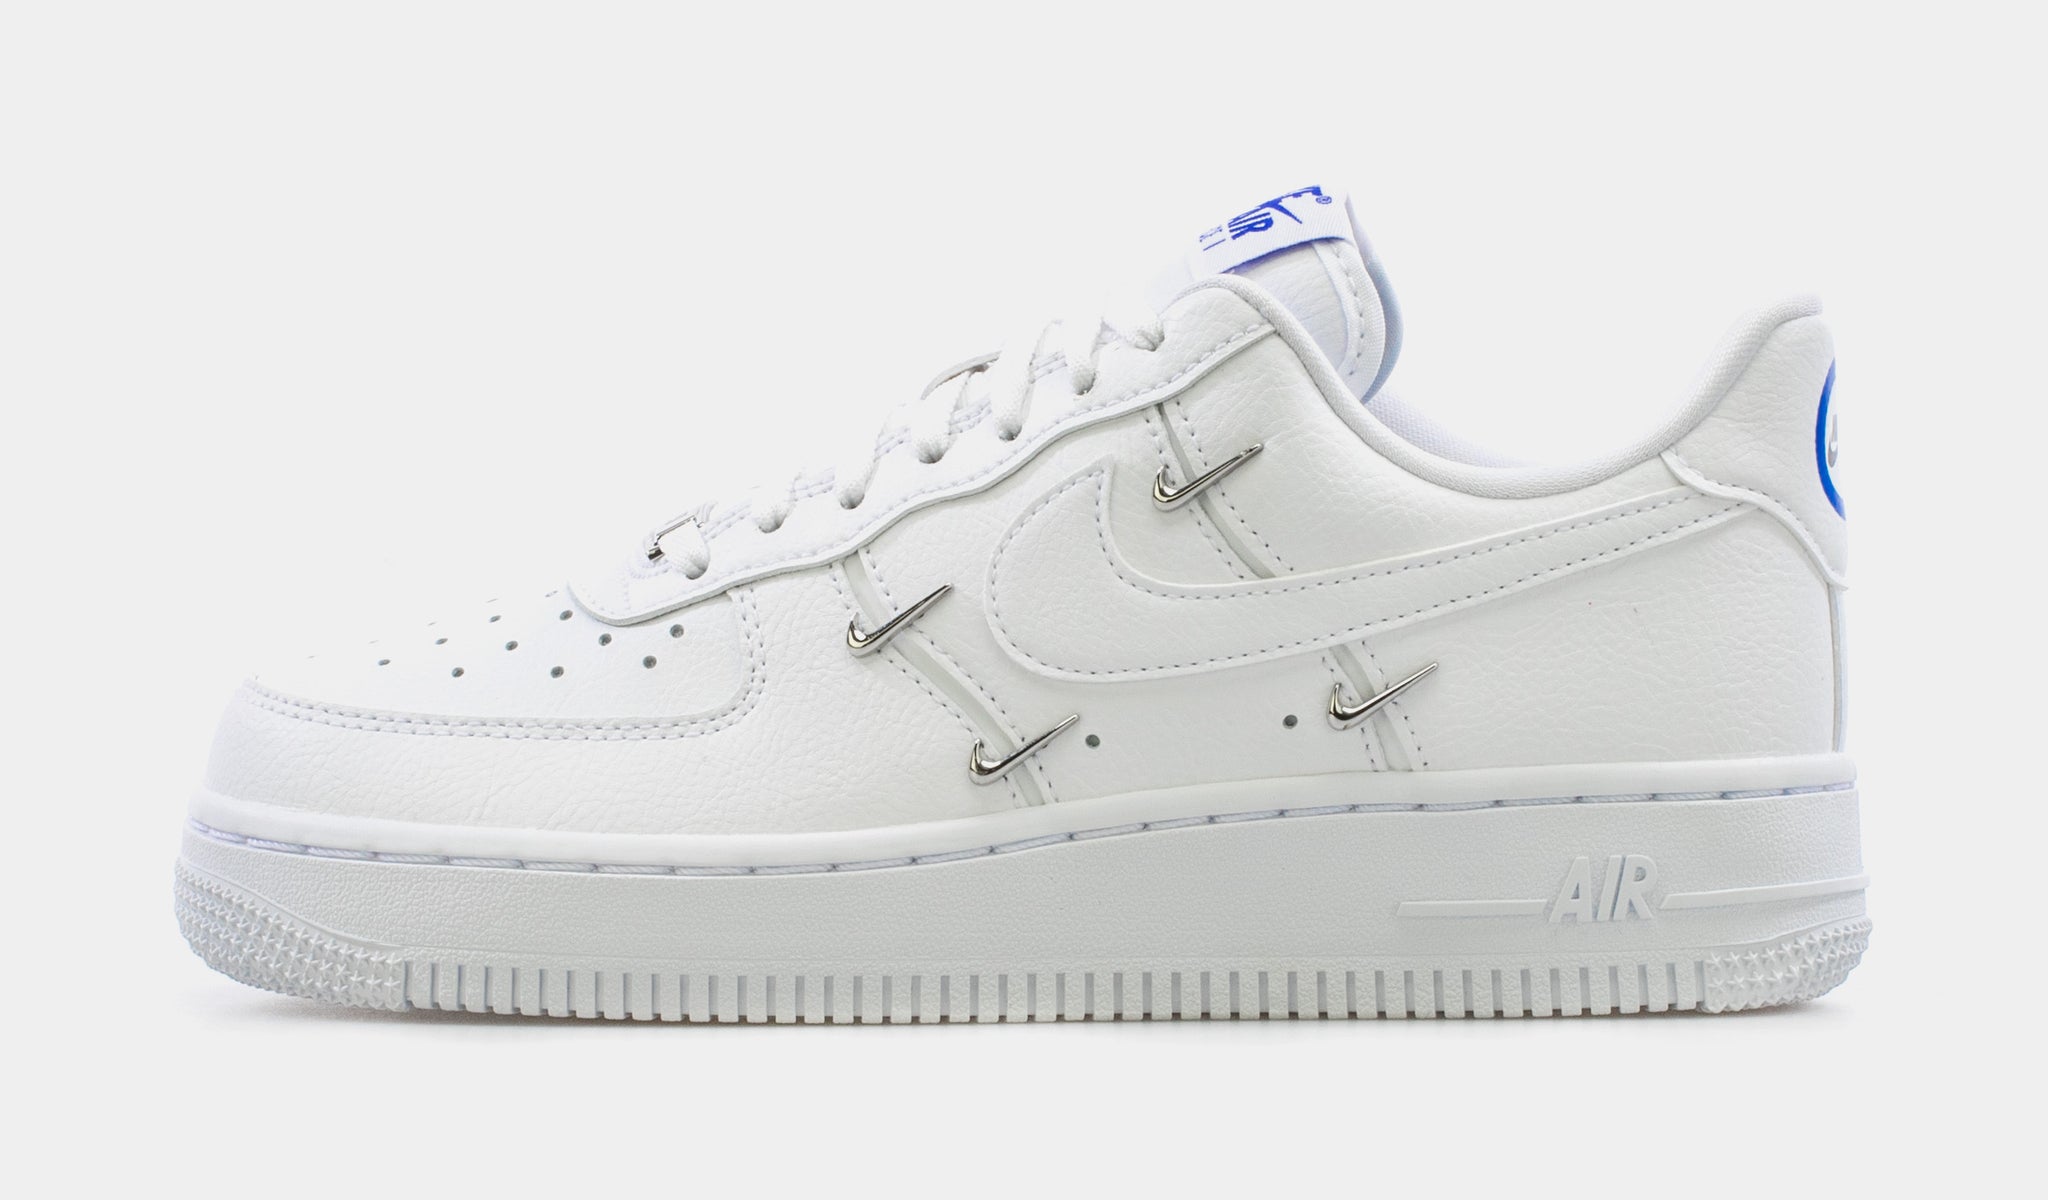 Women's Nike Air Force 1 '07 LX Low - White